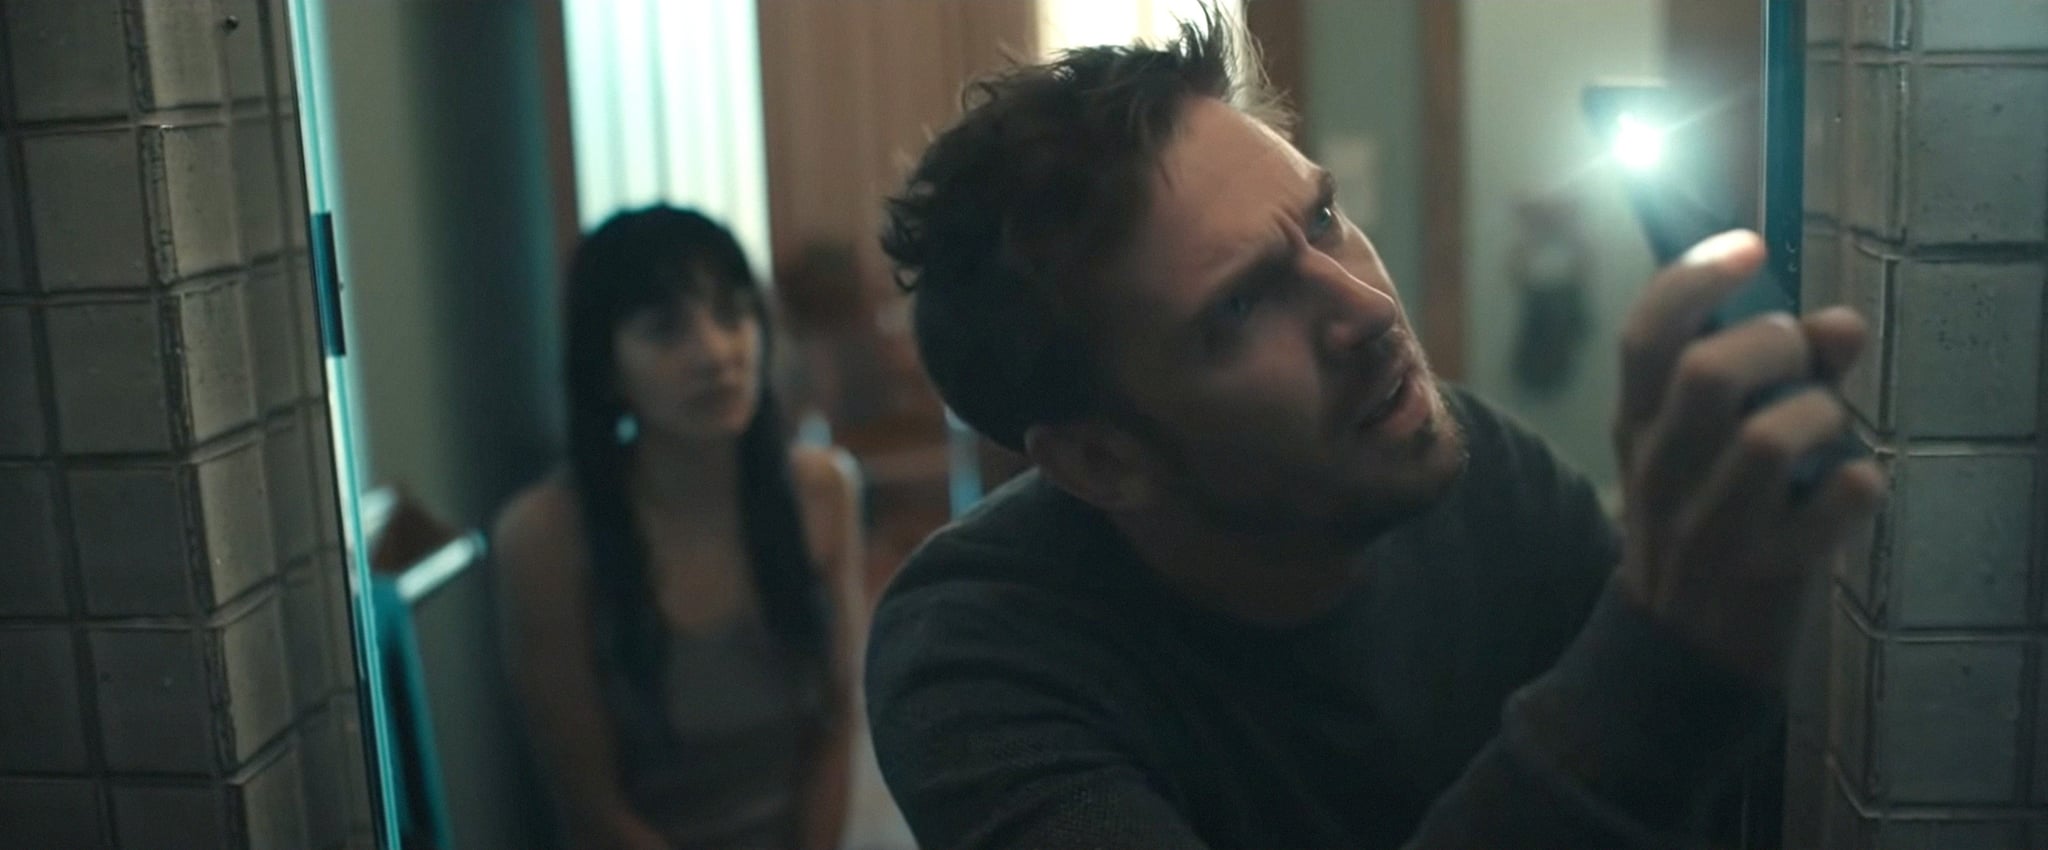 THE RENTAL, from left: Sheila Vand, Dan Stevens, 2020.  IFC Films / Courtesy Everett Collection